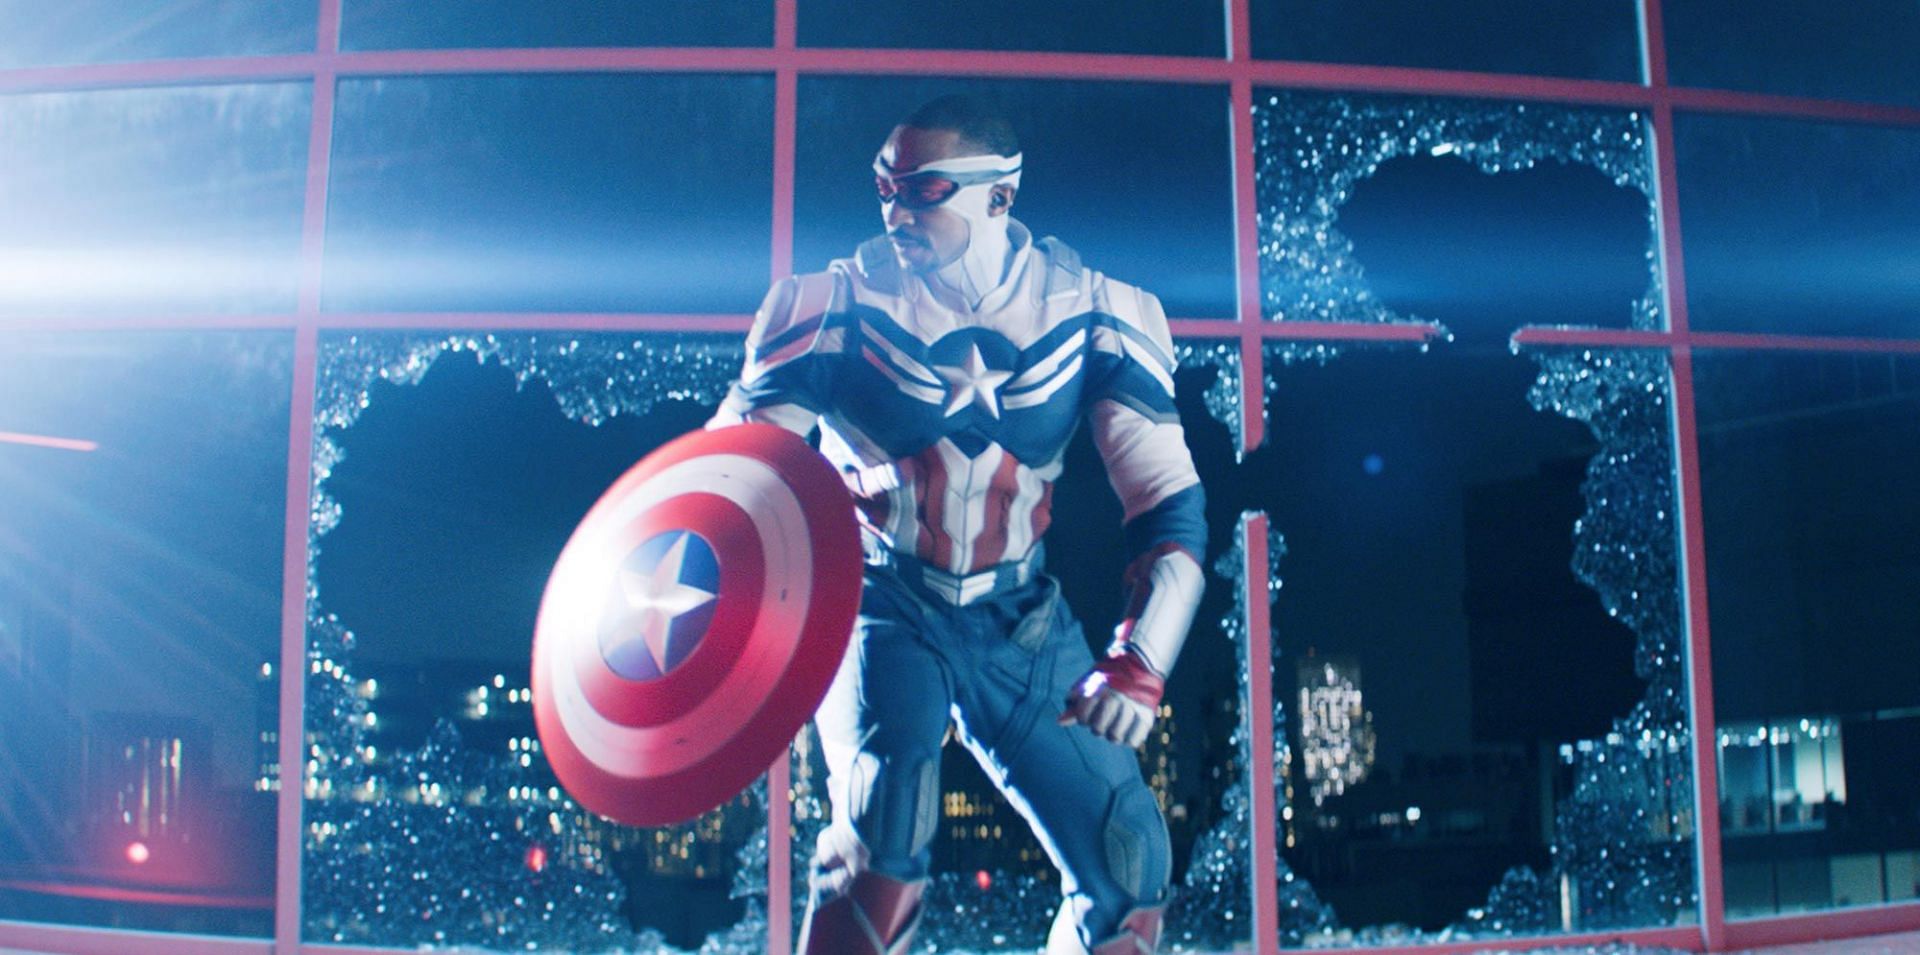 Anthony Mackie soars back into action as Captain America in the exhilarating Brave New World (Image via Marvel Studios)